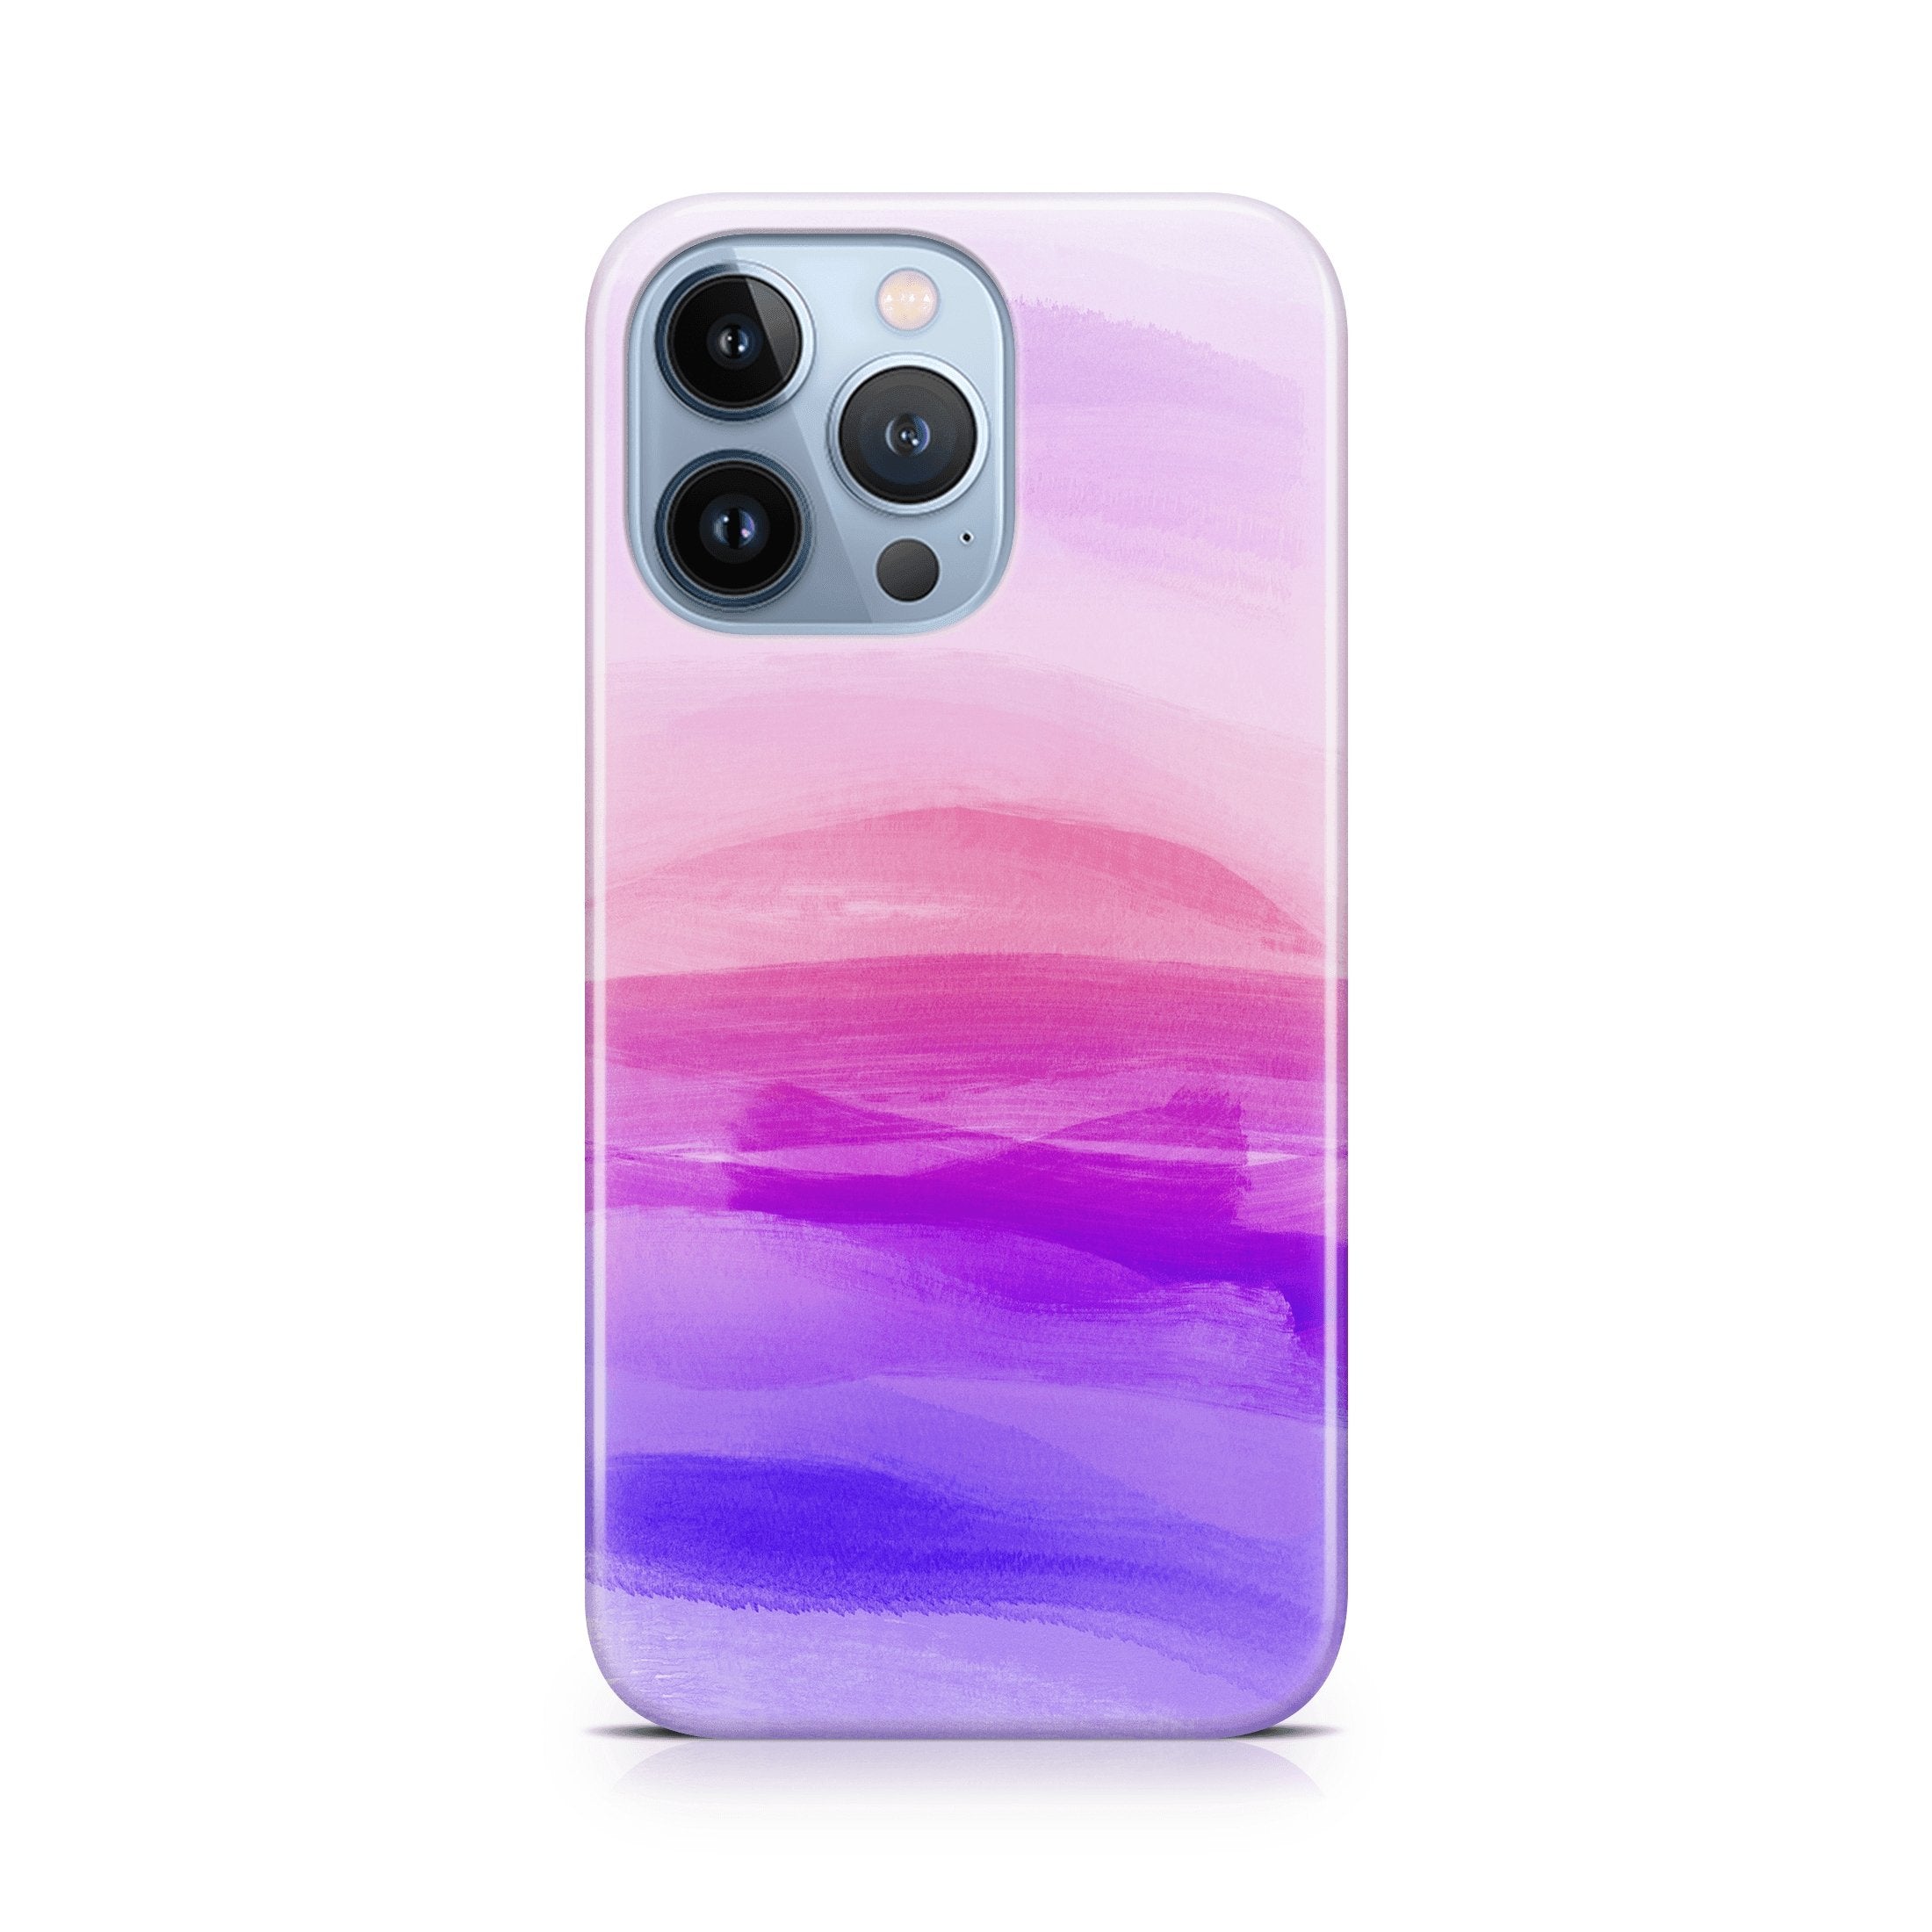 Sunrise Pink Ombre - iPhone phone case designs by CaseSwagger